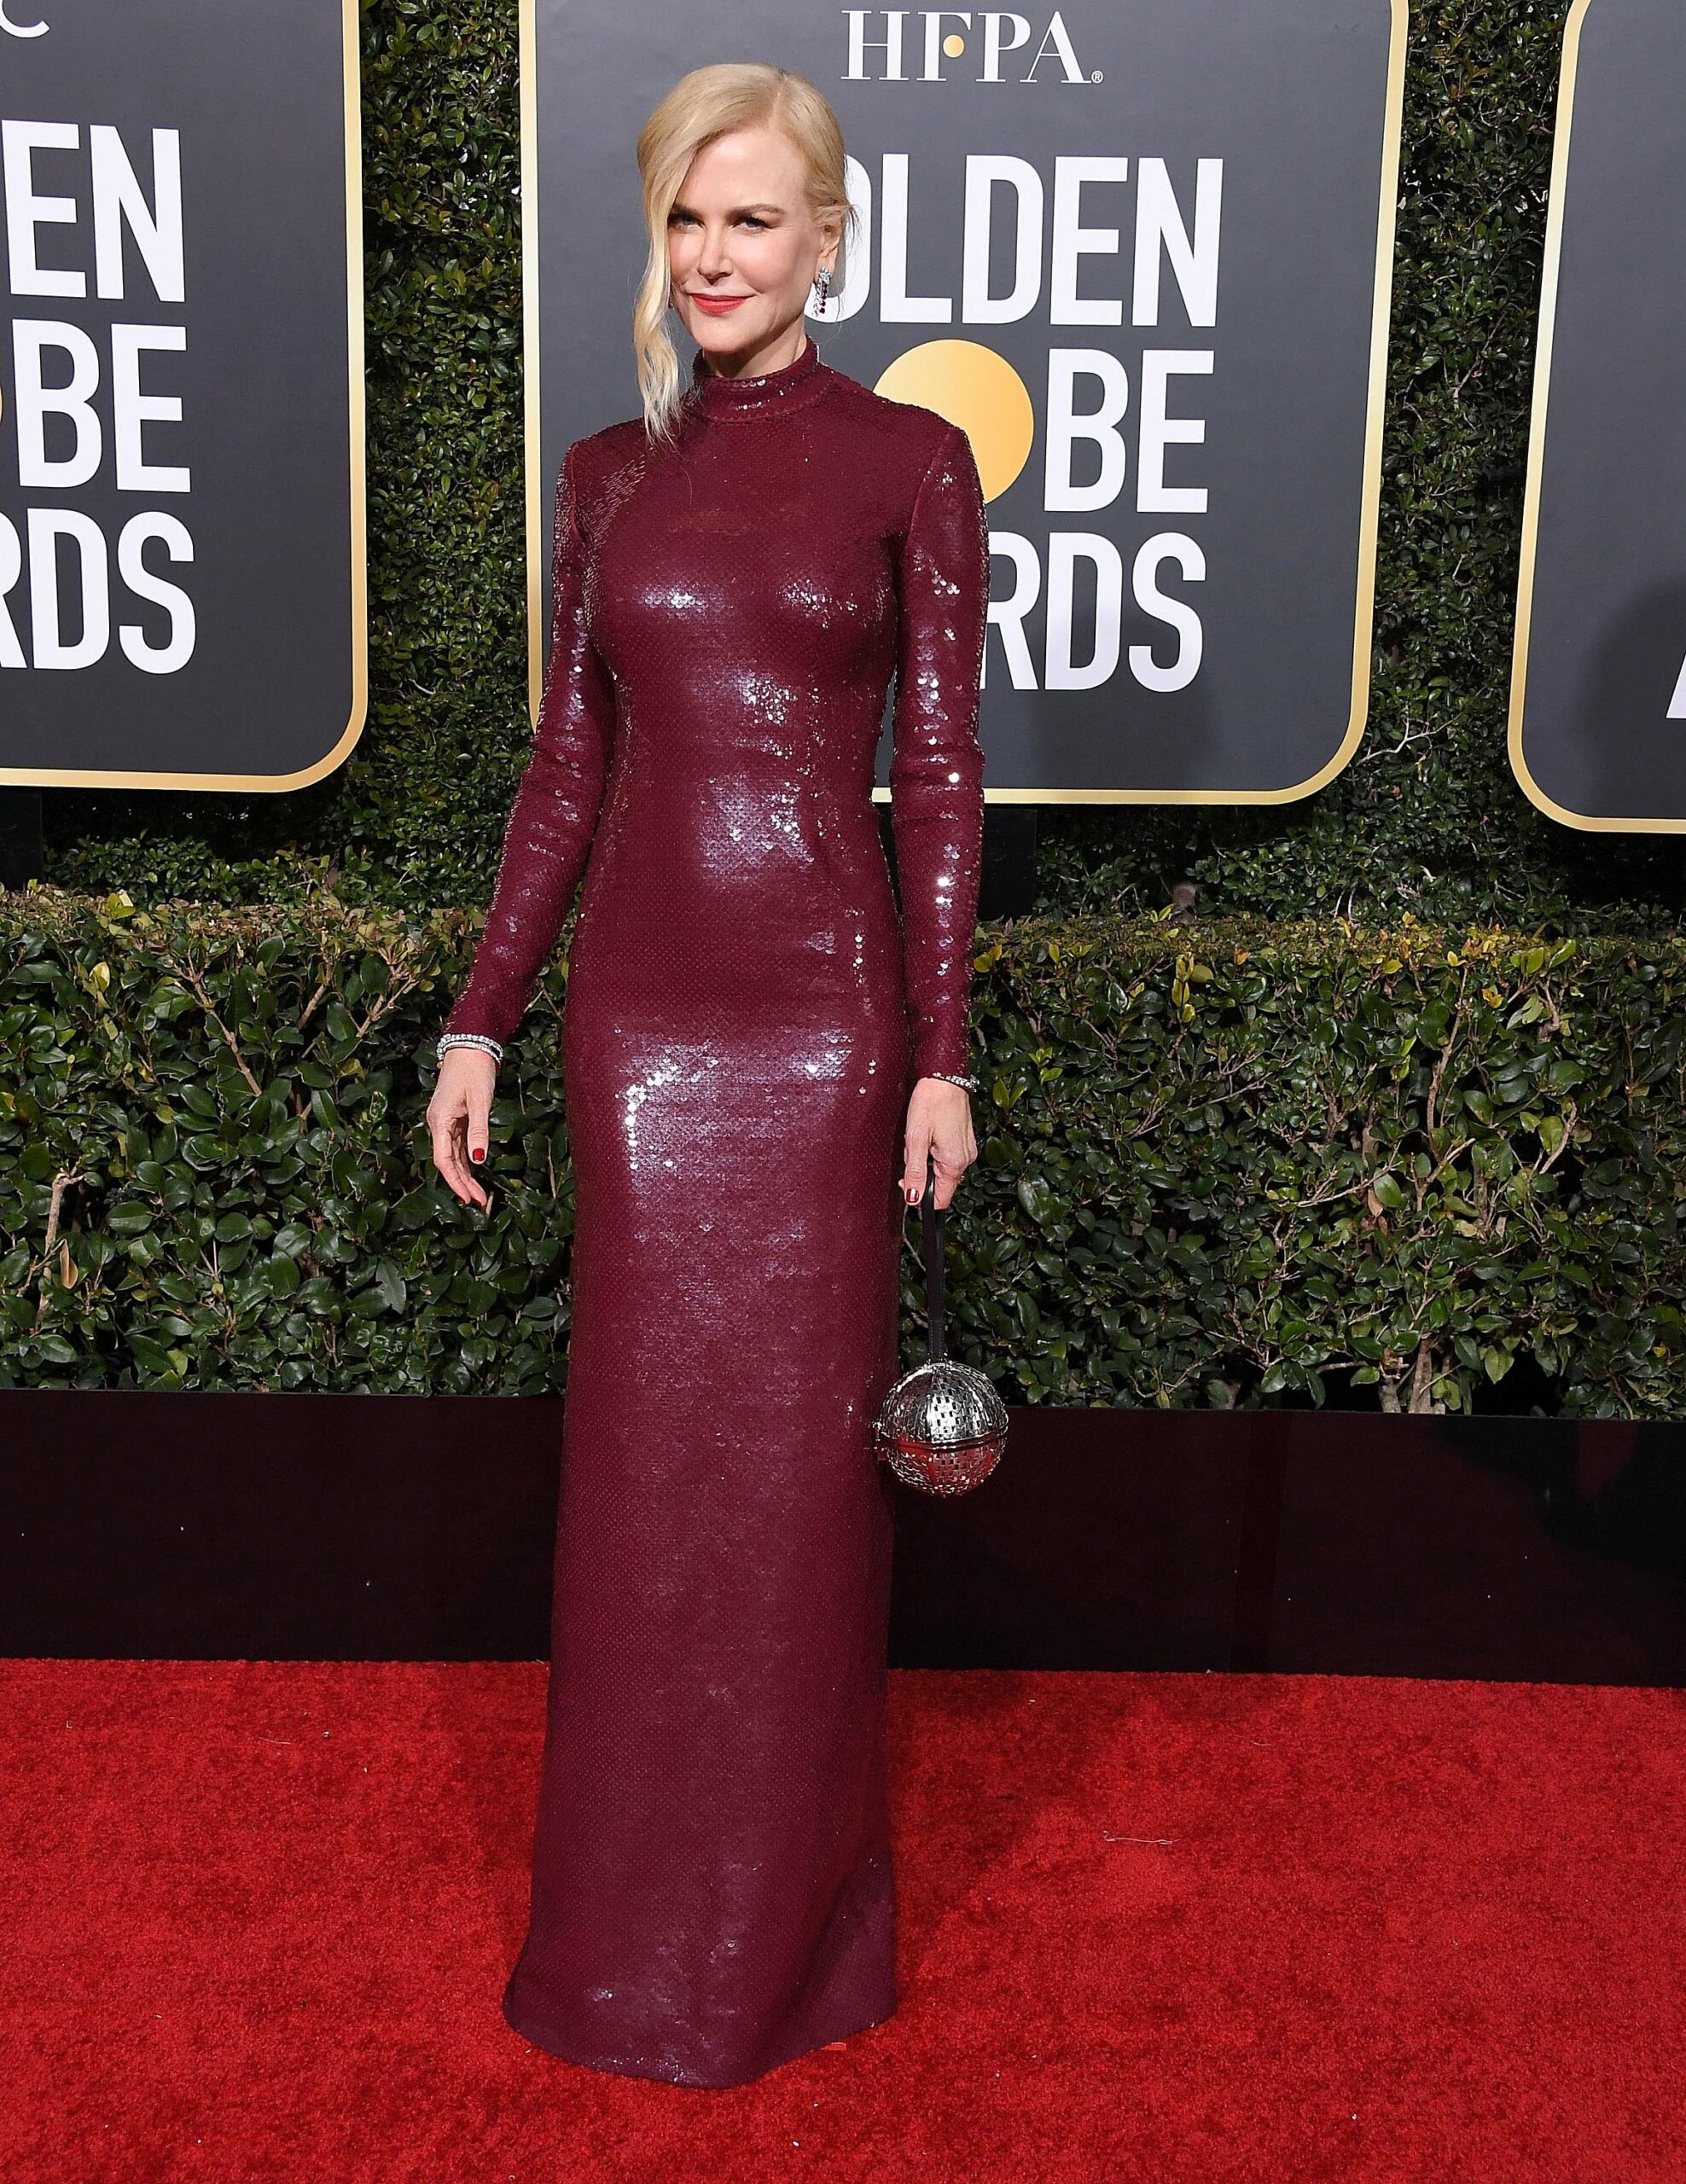 At the 2019 Golden Globes in Michael Kors